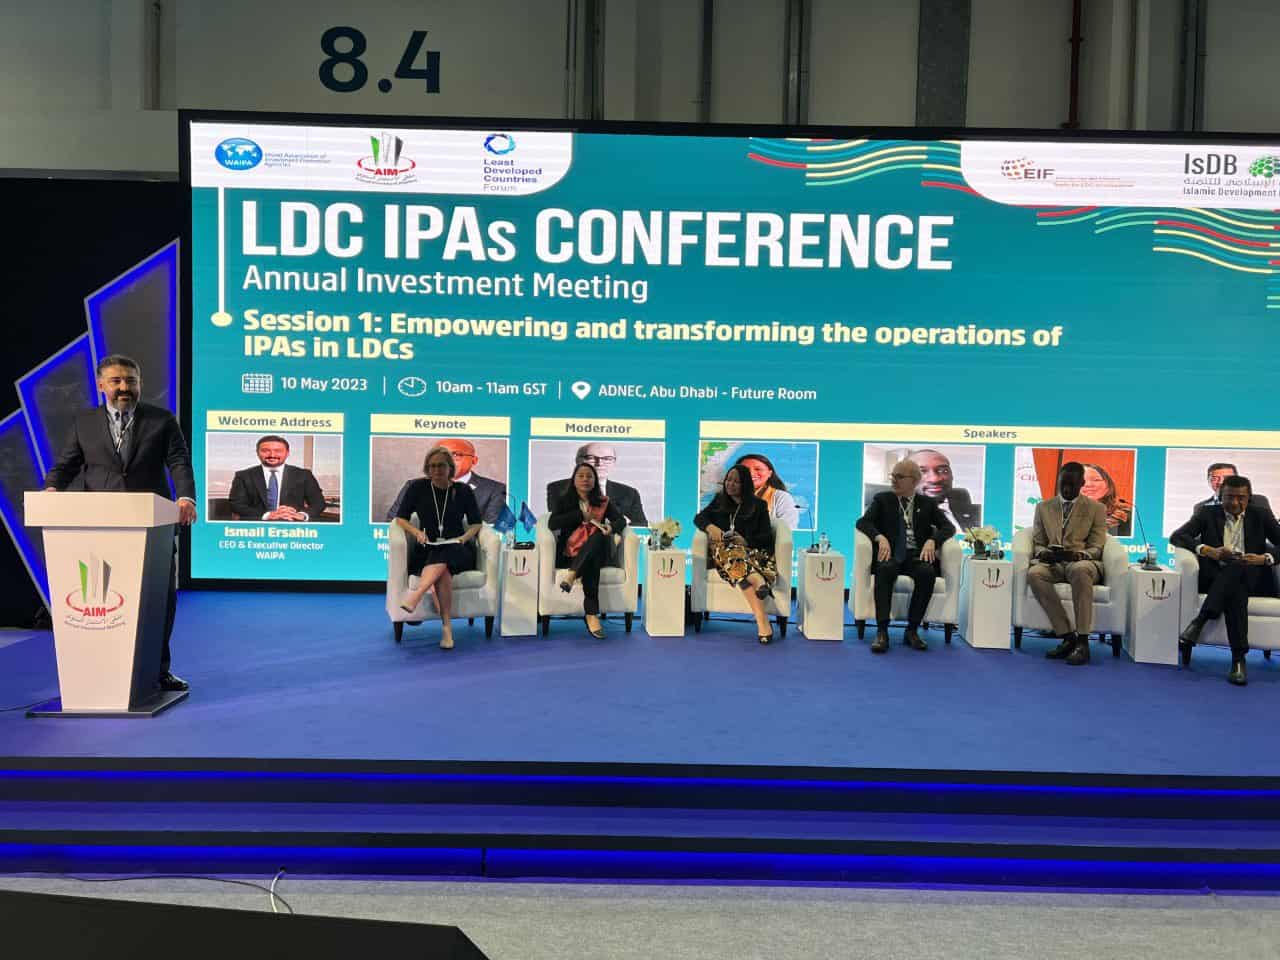 LDC IPAs Conference:”Empowering and transforming the operations of IPAs in LDCs”